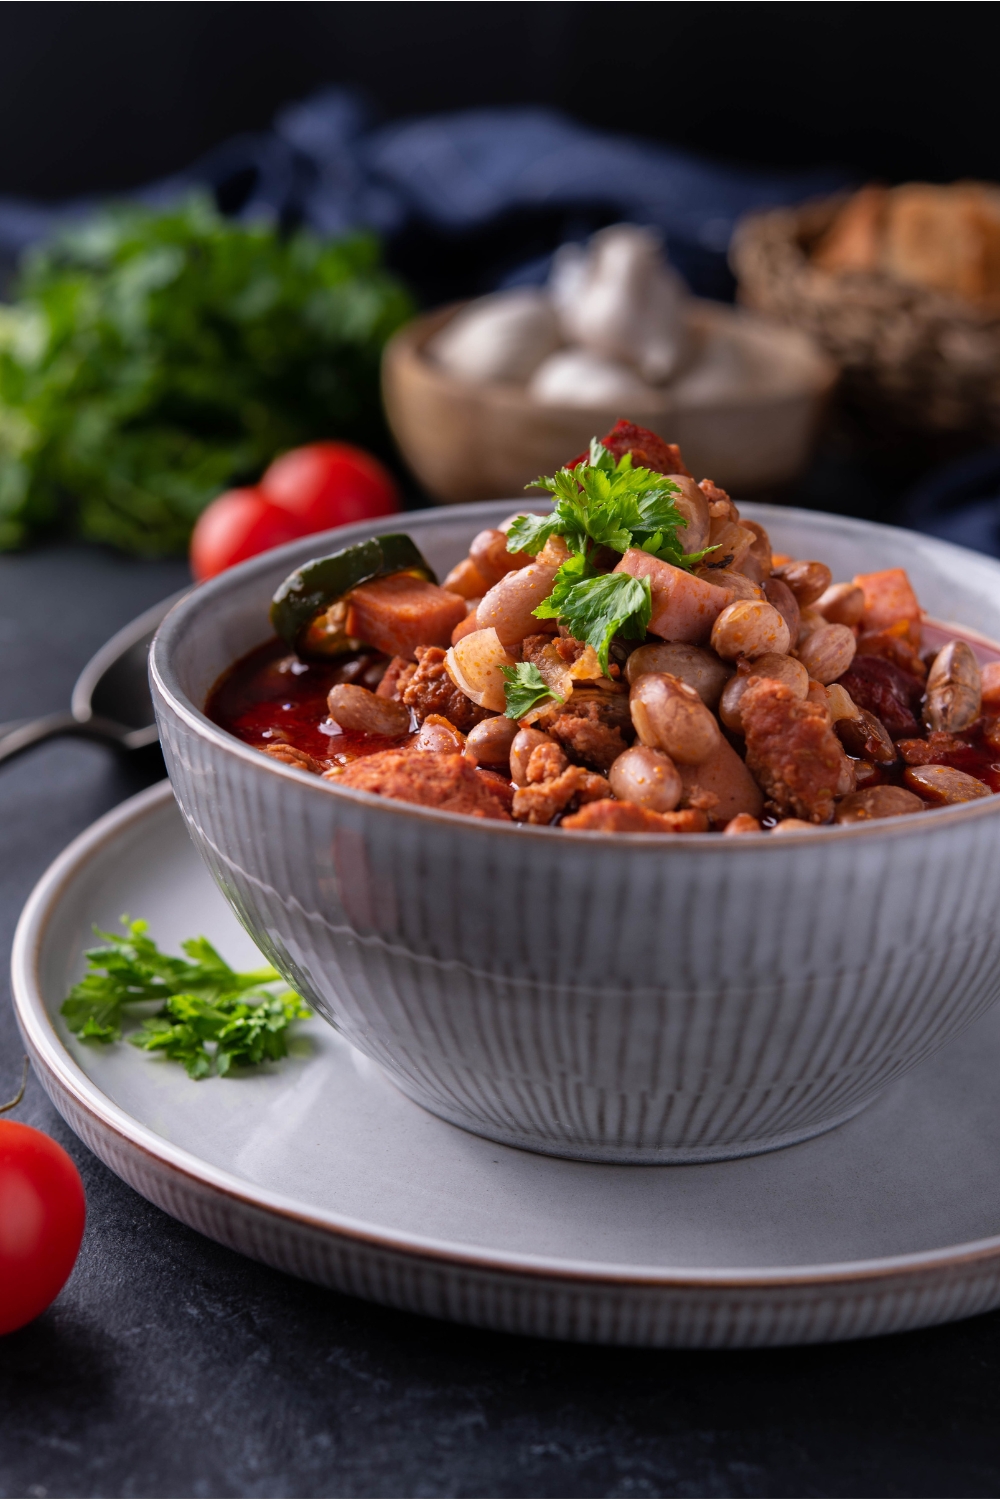 Charro beans in a blue bowl atop a blue plate, garnished with fresh herbs.